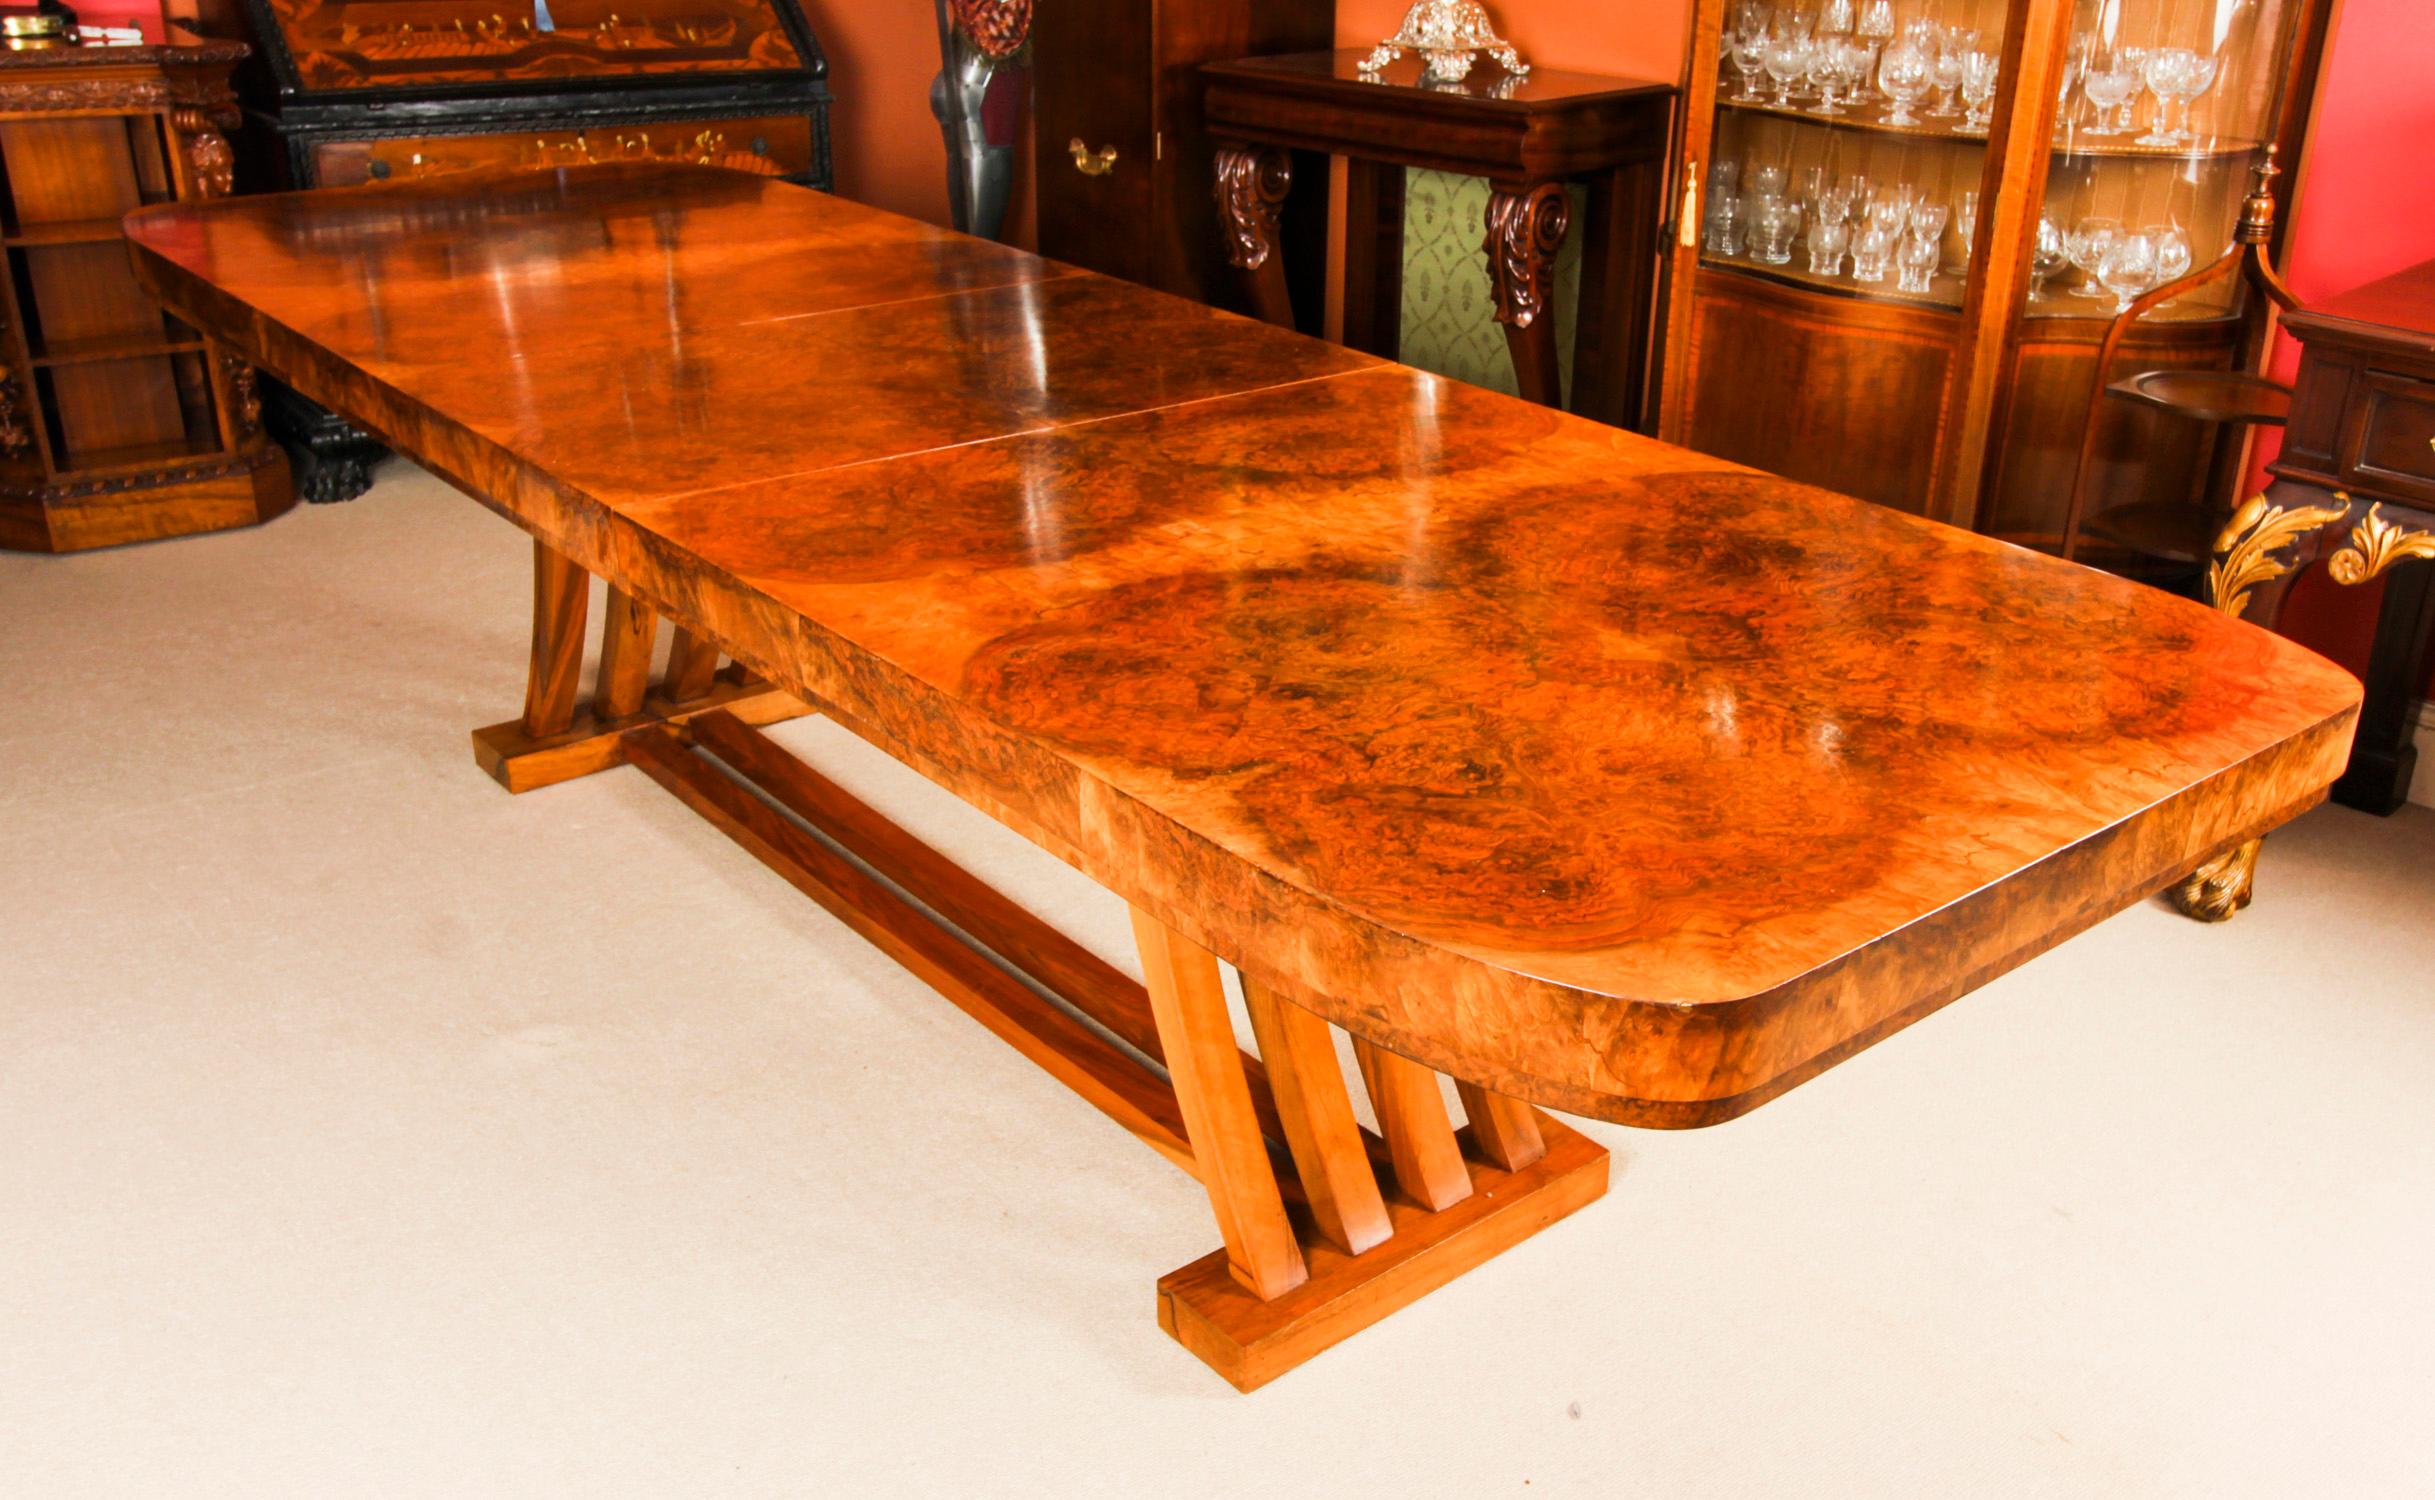 This is a beautiful and rare large antique Art Deco dining table designed by Salaman Hille, for Hille & Co. Ltd., Circa 1920 in date.

Crafted in burr walnut with a shaped multiple strut base the table has a leaf that folds away when not required